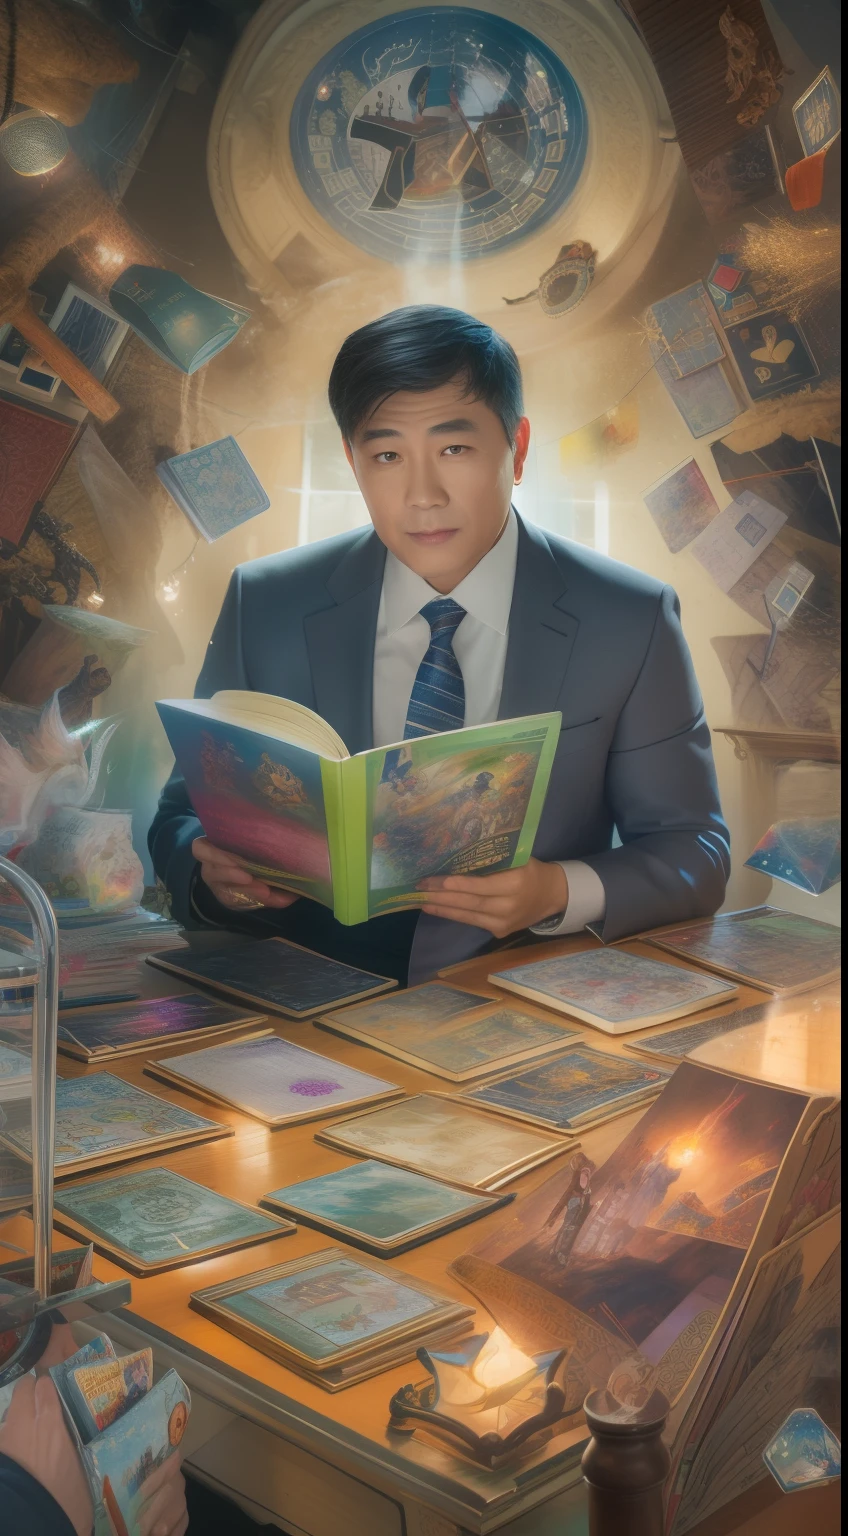 A detailed painting depicting a handsome, mature Asian man in a suit surrounded by a flurry of glowing magic cards and the book Dungeons and Dragons in the center.